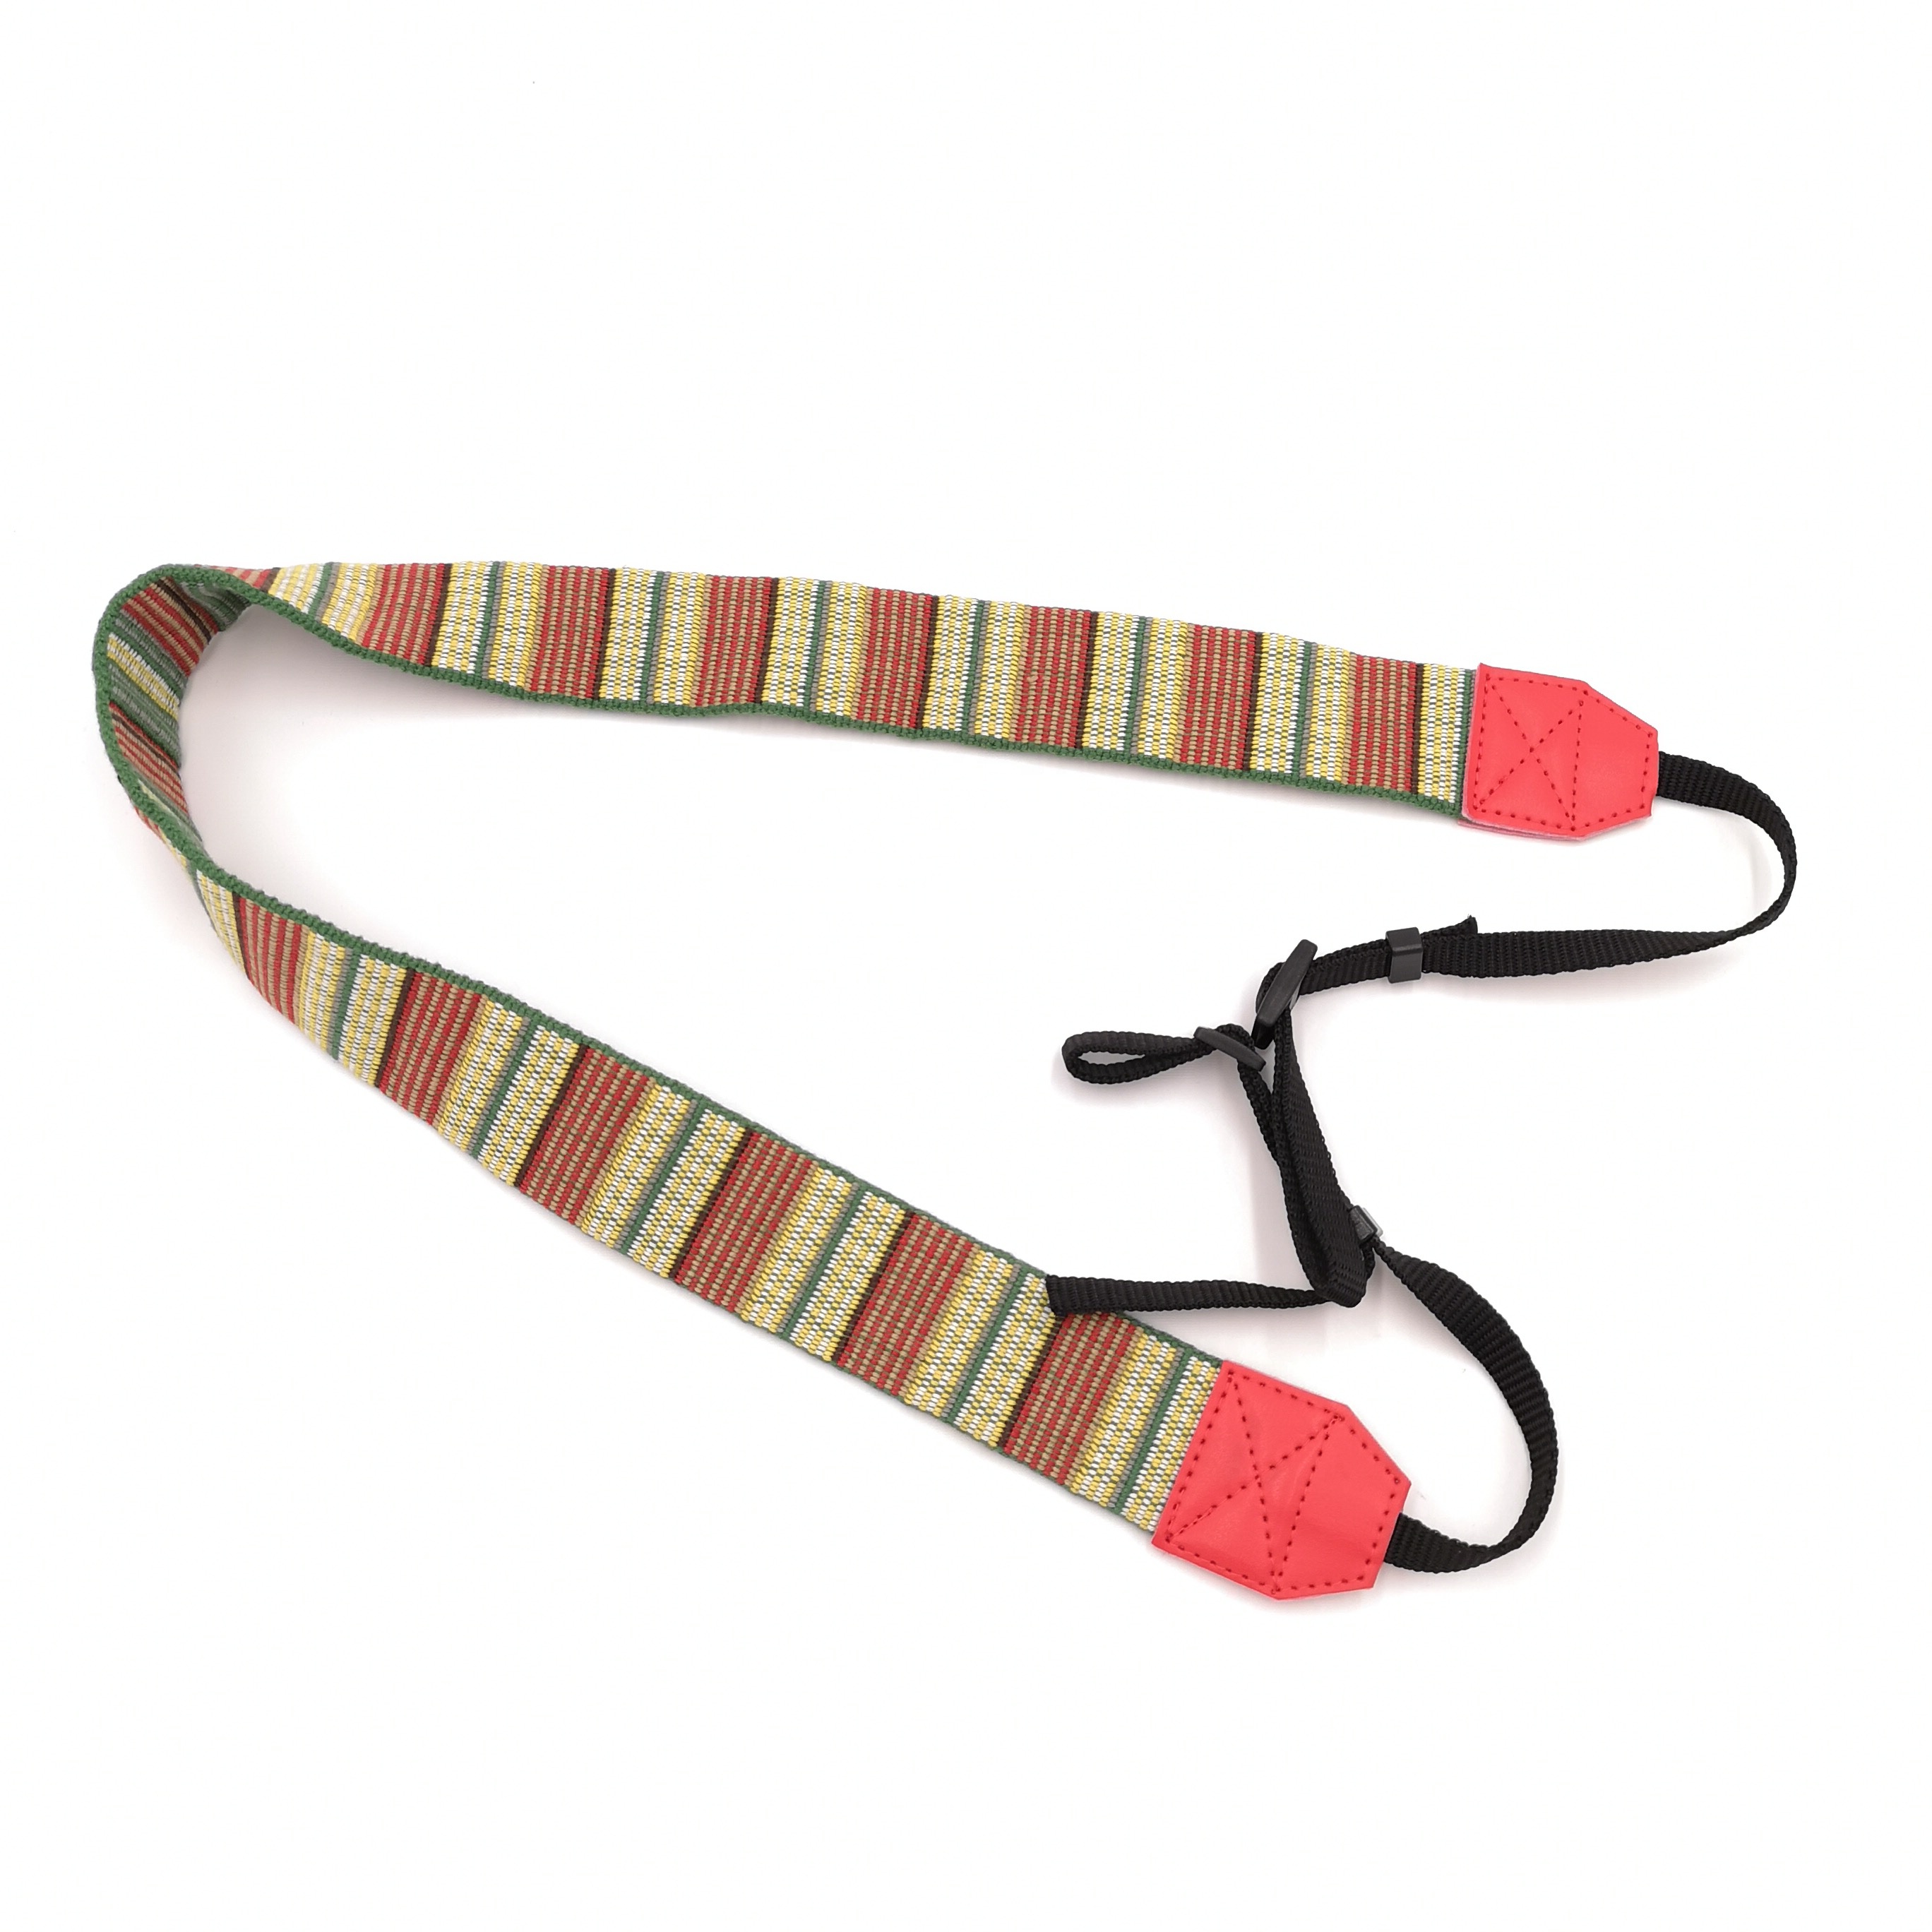 Best quality Lighter Lanyard - Colorful durable camera strap knit lanyard – Bison